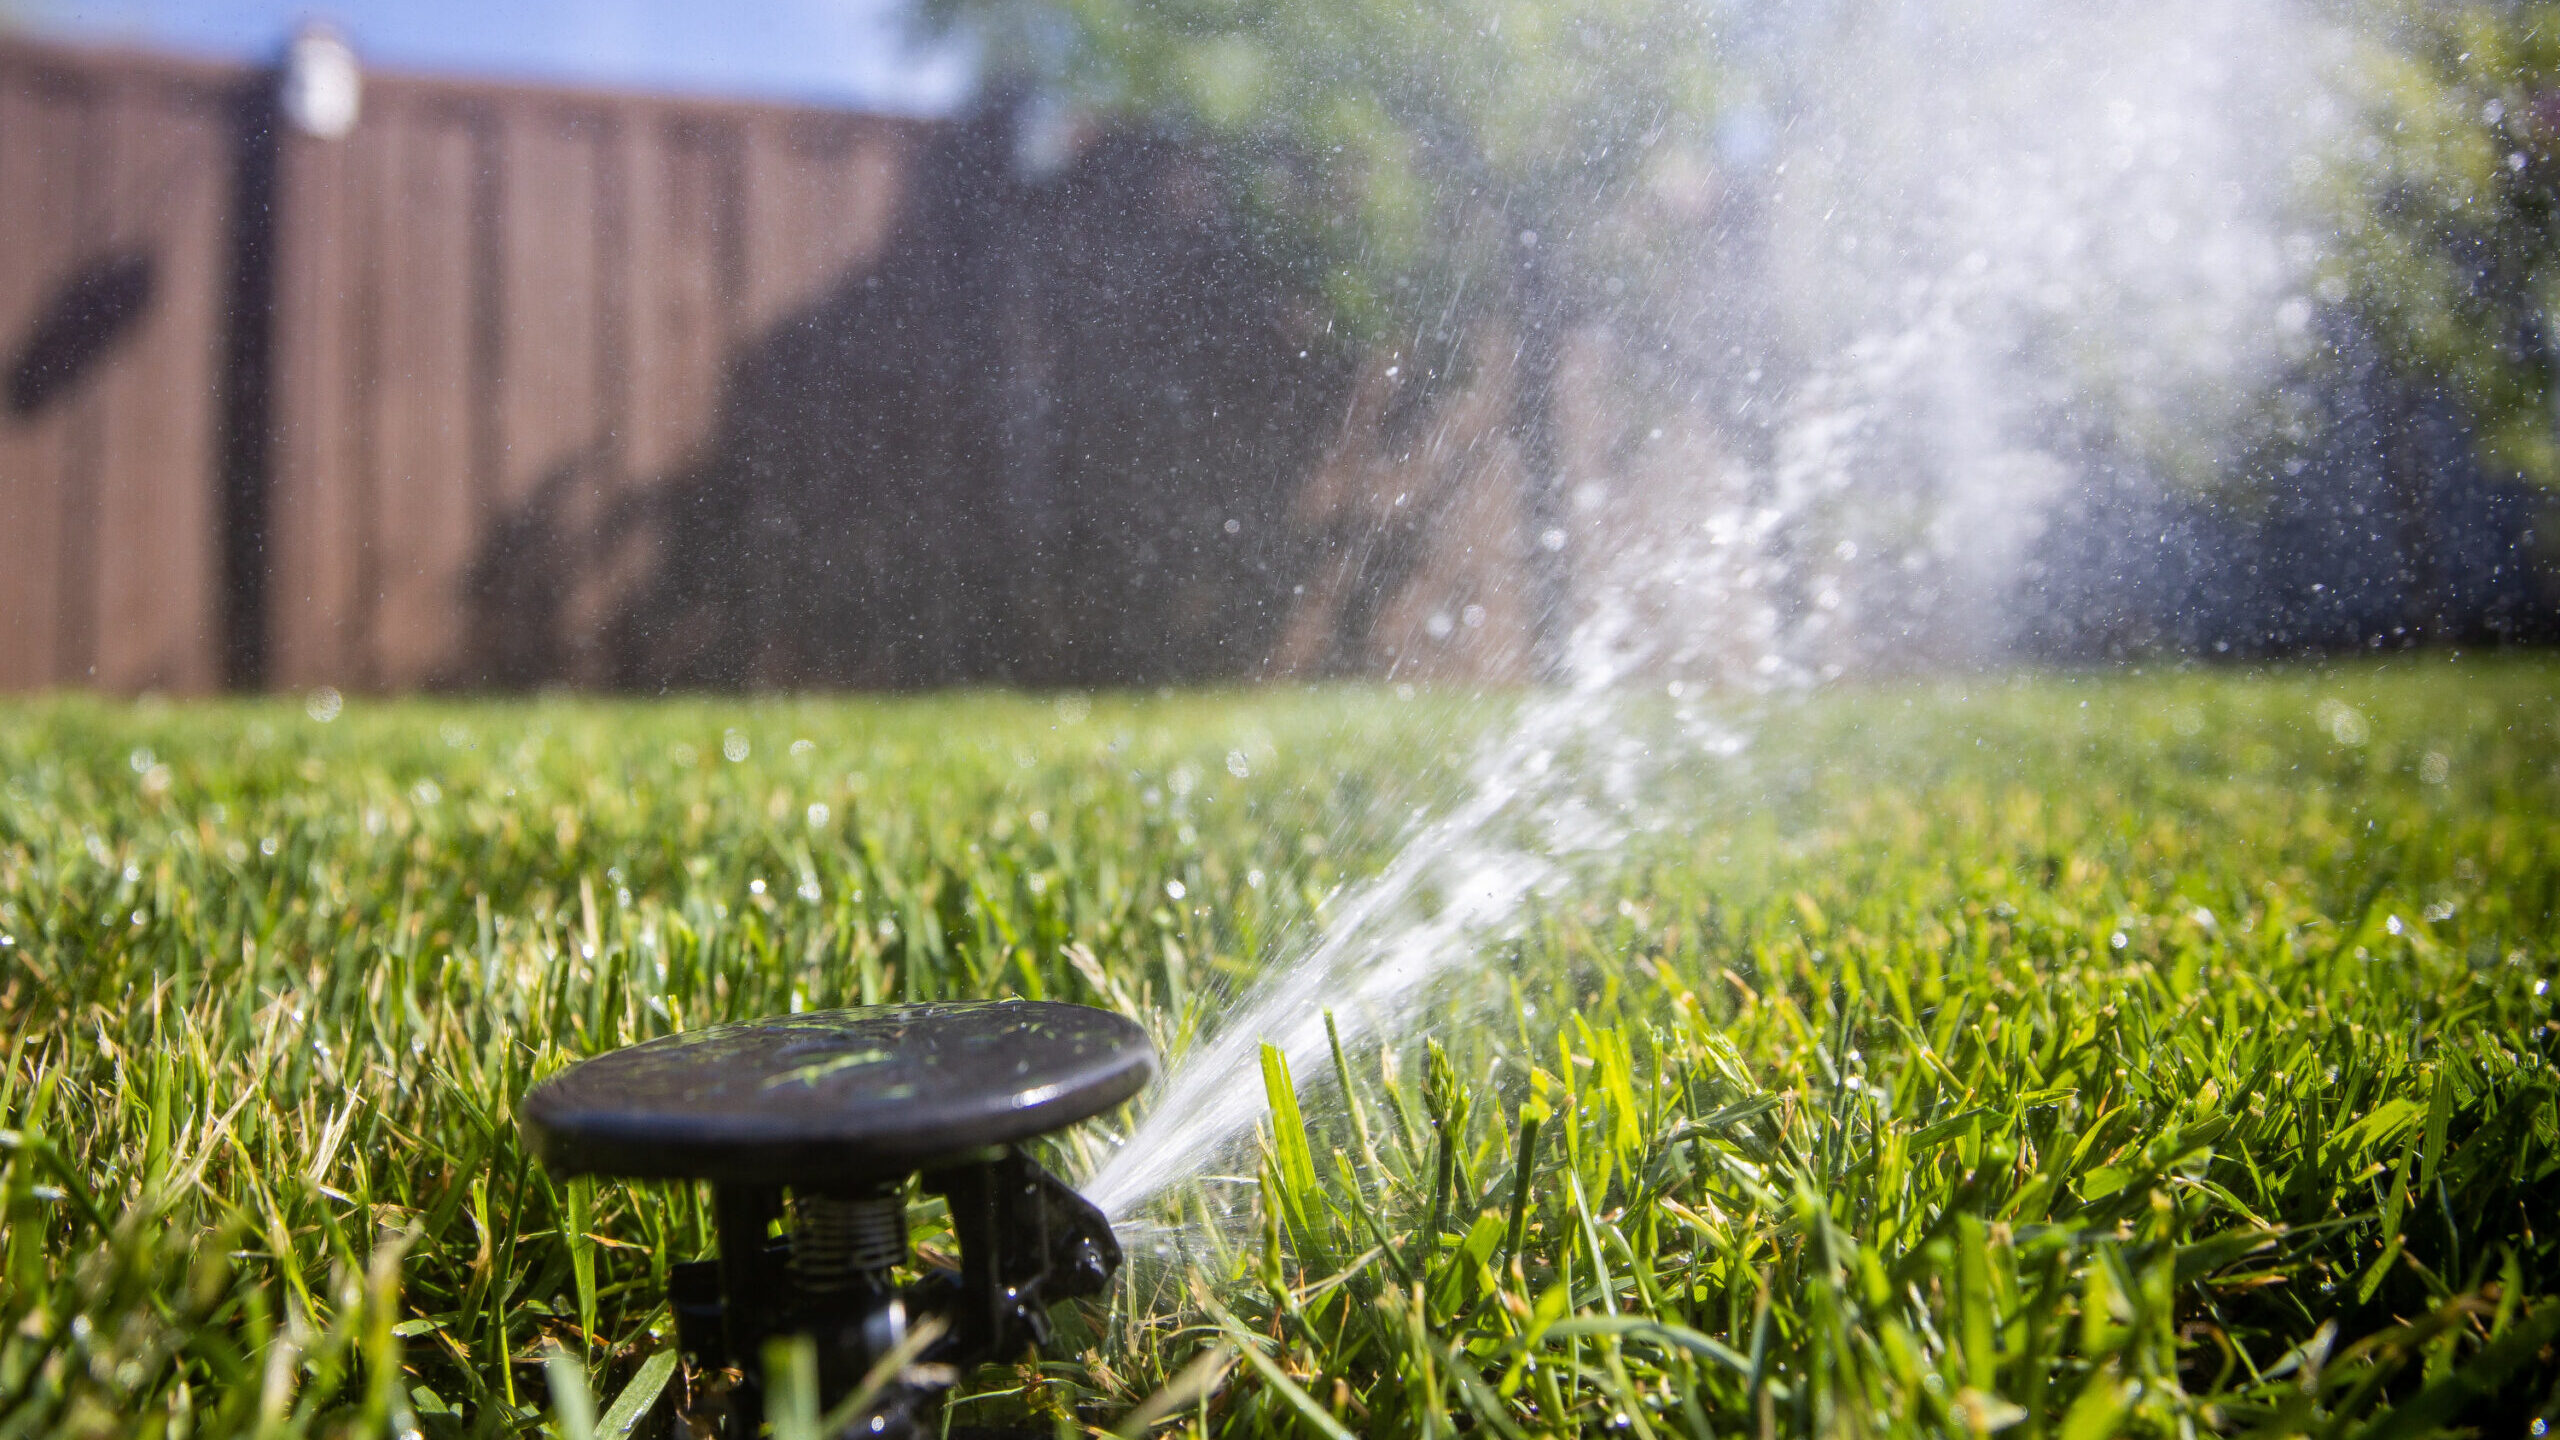 Sprinklers water a lawn in Salt Lake City on Friday, May 7, 2021. (Spenser Heaps, Deseret News)...